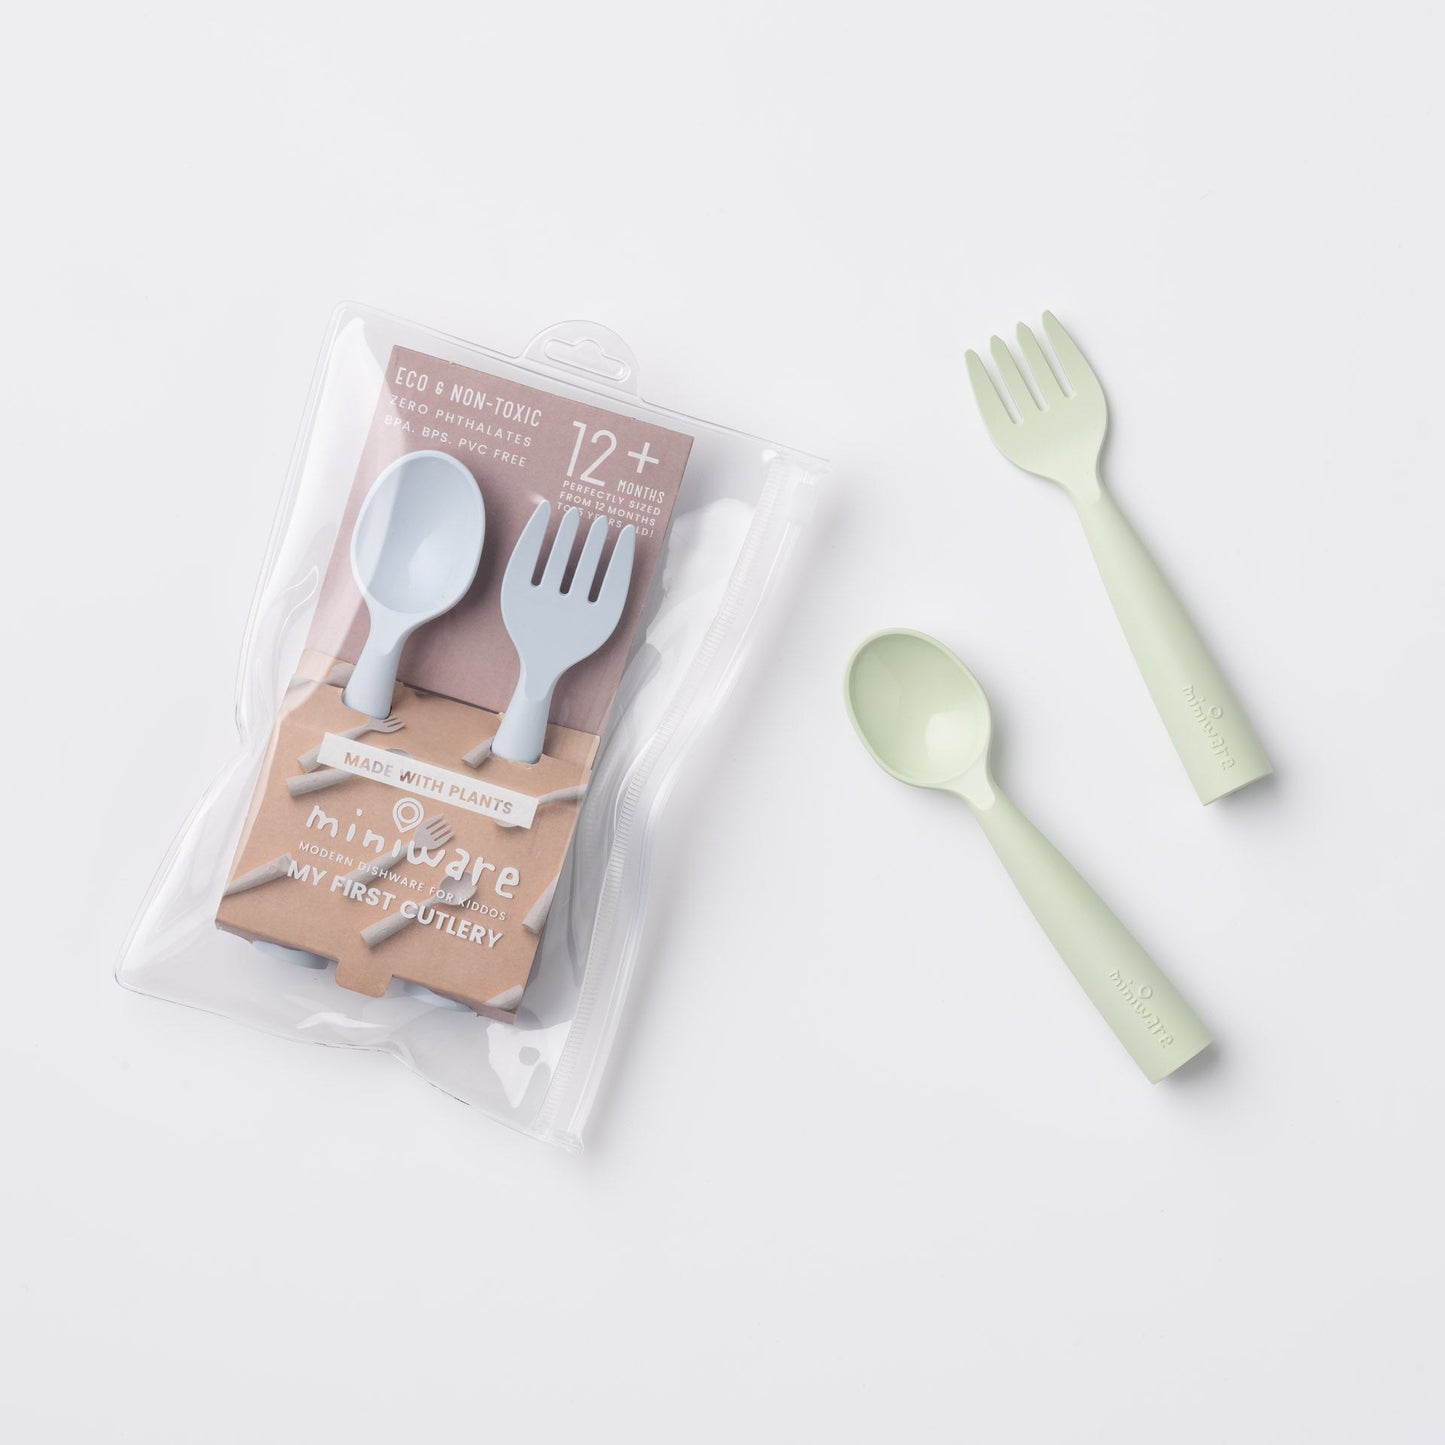 My first cutlery 2-pack